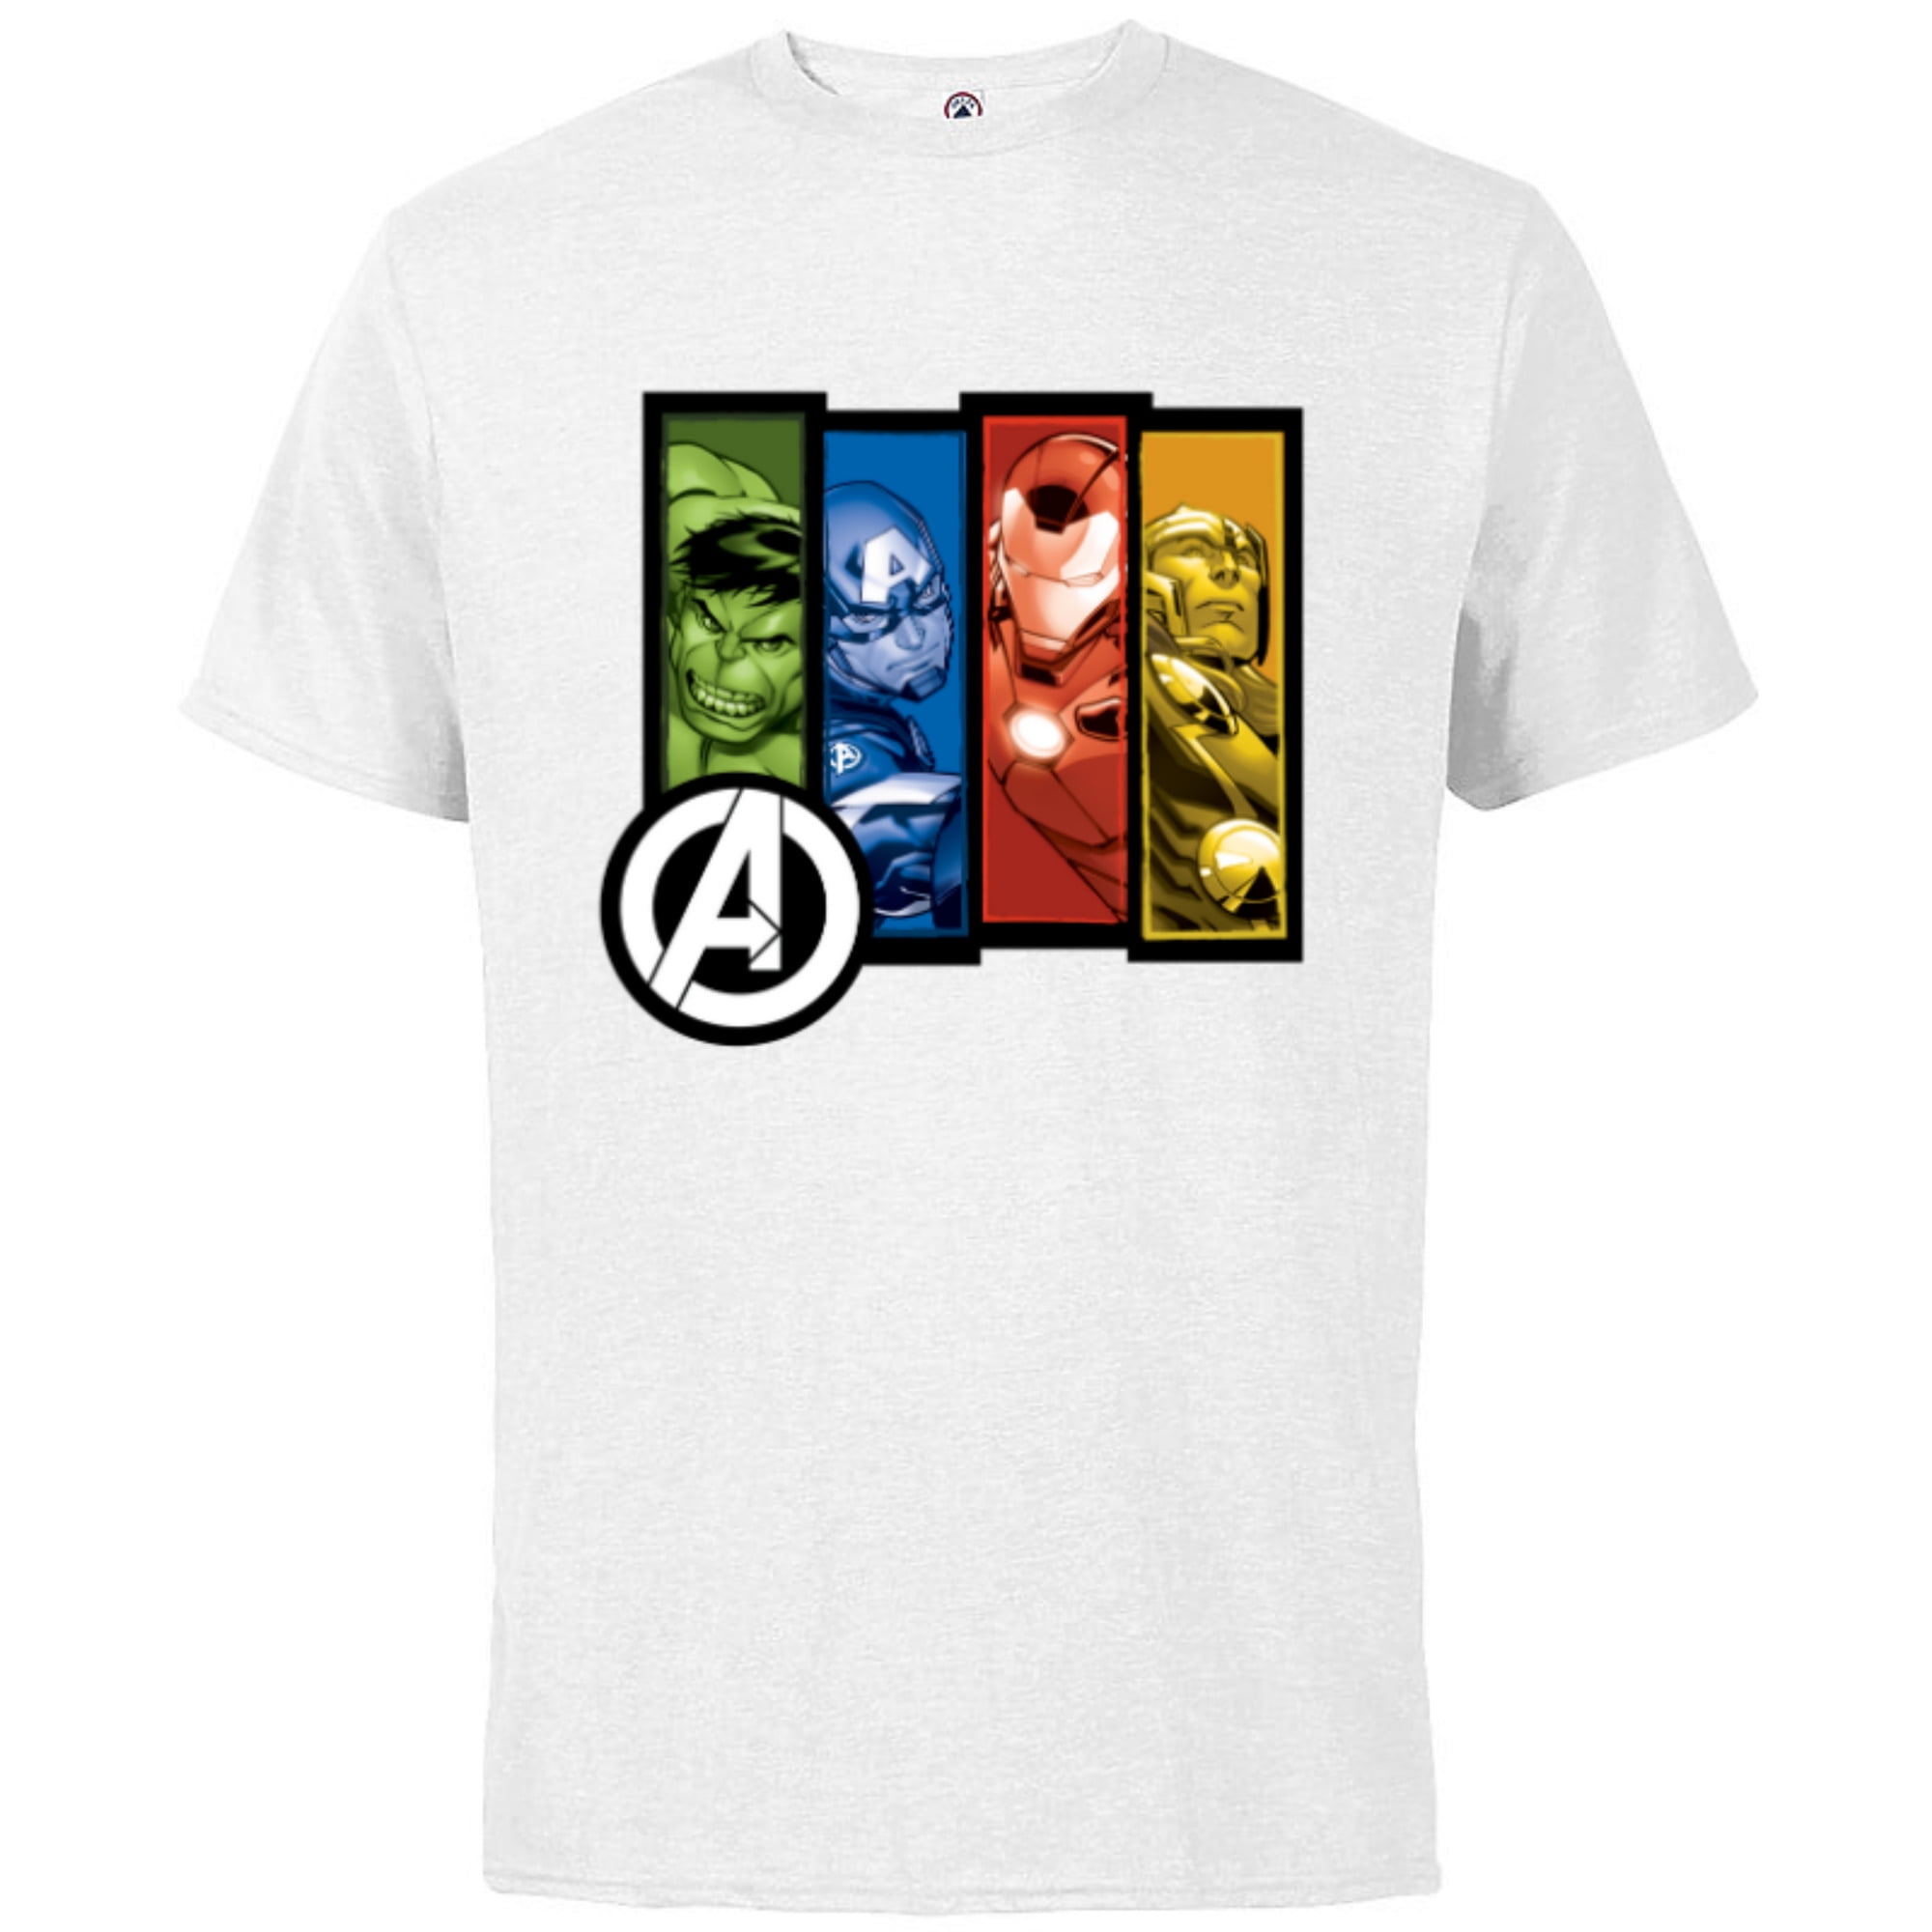 Short Customized-Red Cotton - T-Shirt Colors Avengers Marvel Sleeve - for Heroes Adults Four Four